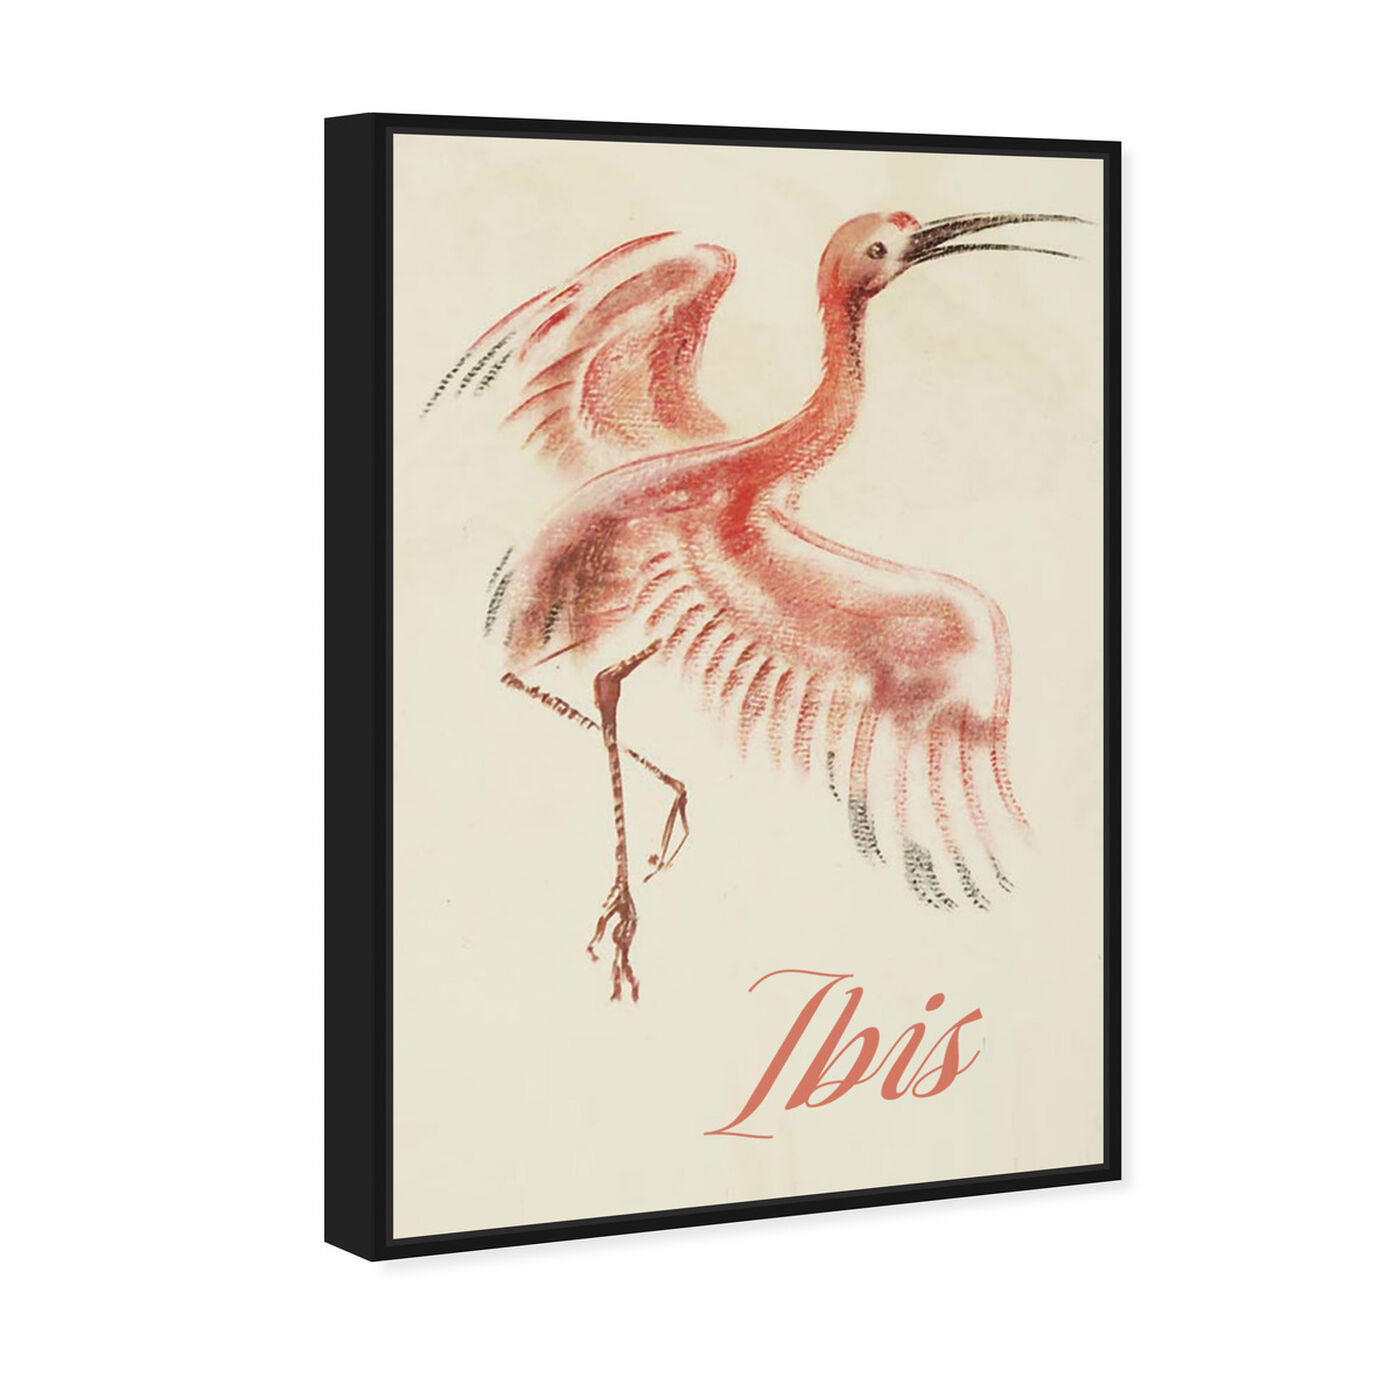 Angled view of Ibis featuring animals and birds art.